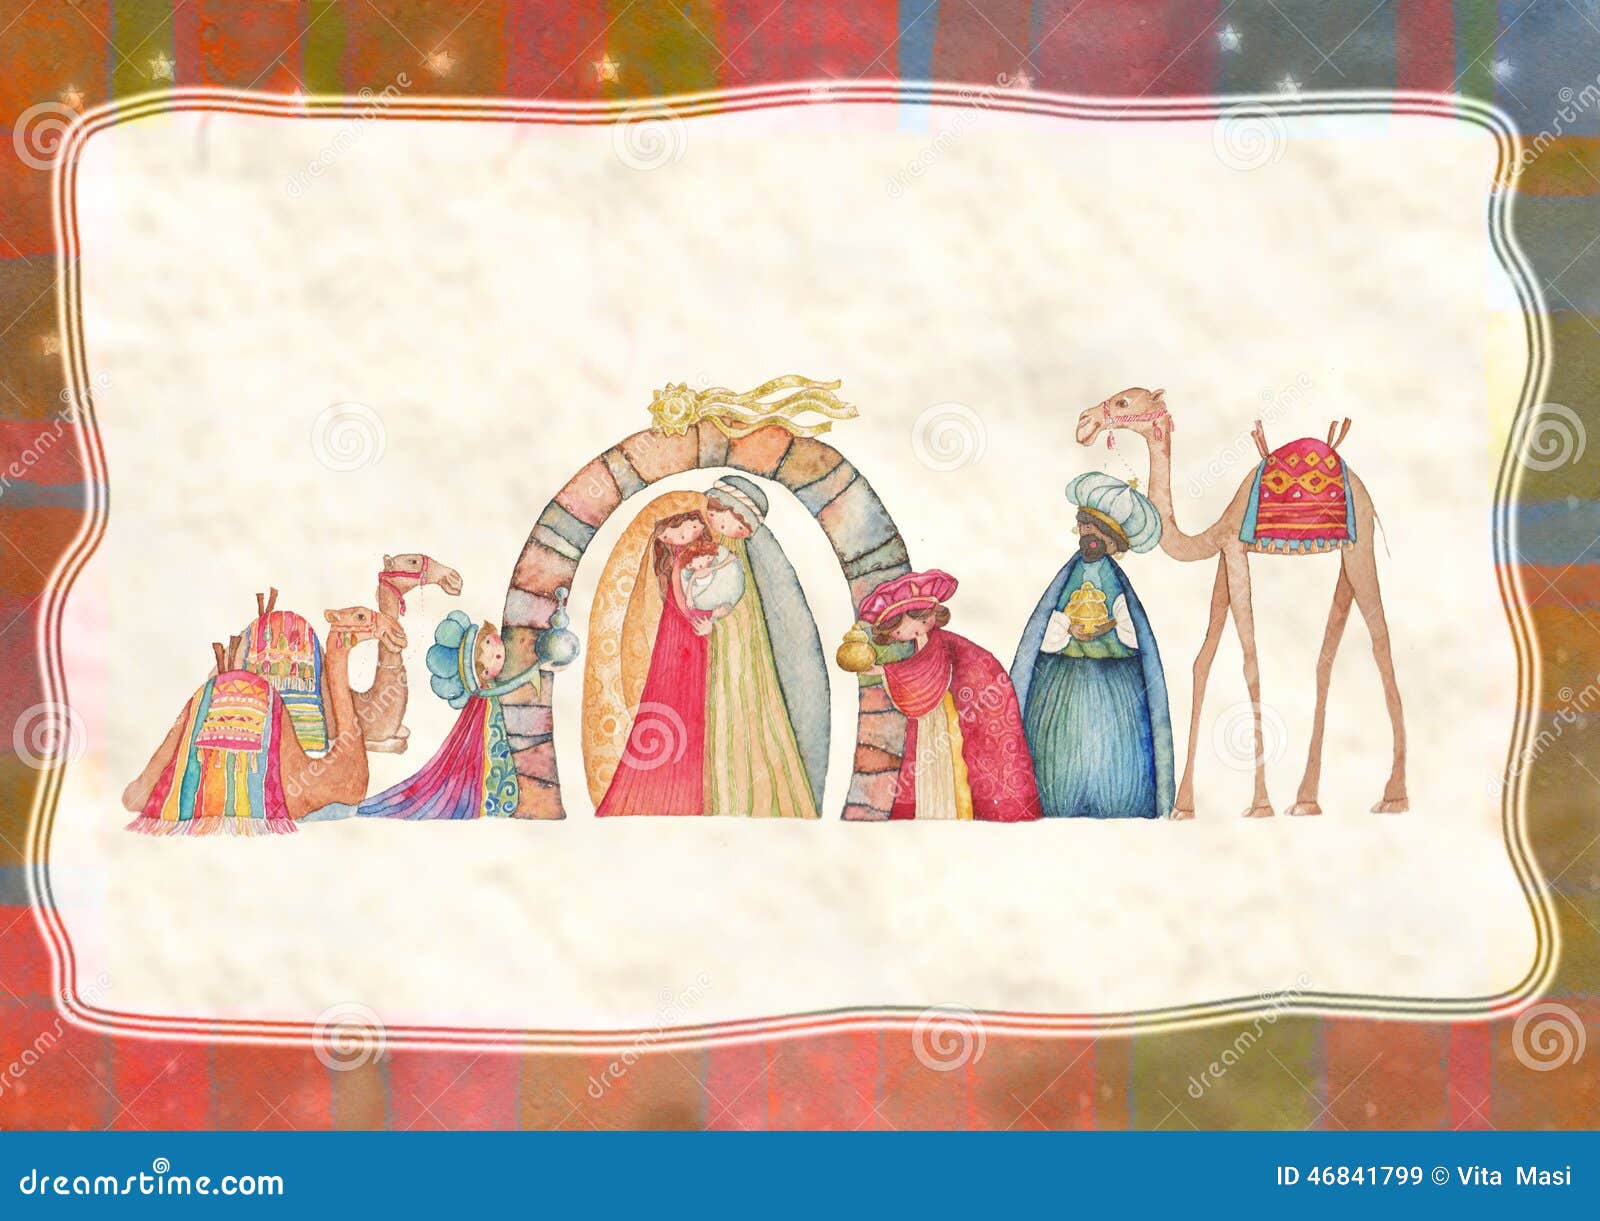 Illustration of Christian Christmas Nativity scene with the three wise men royalty free illustration